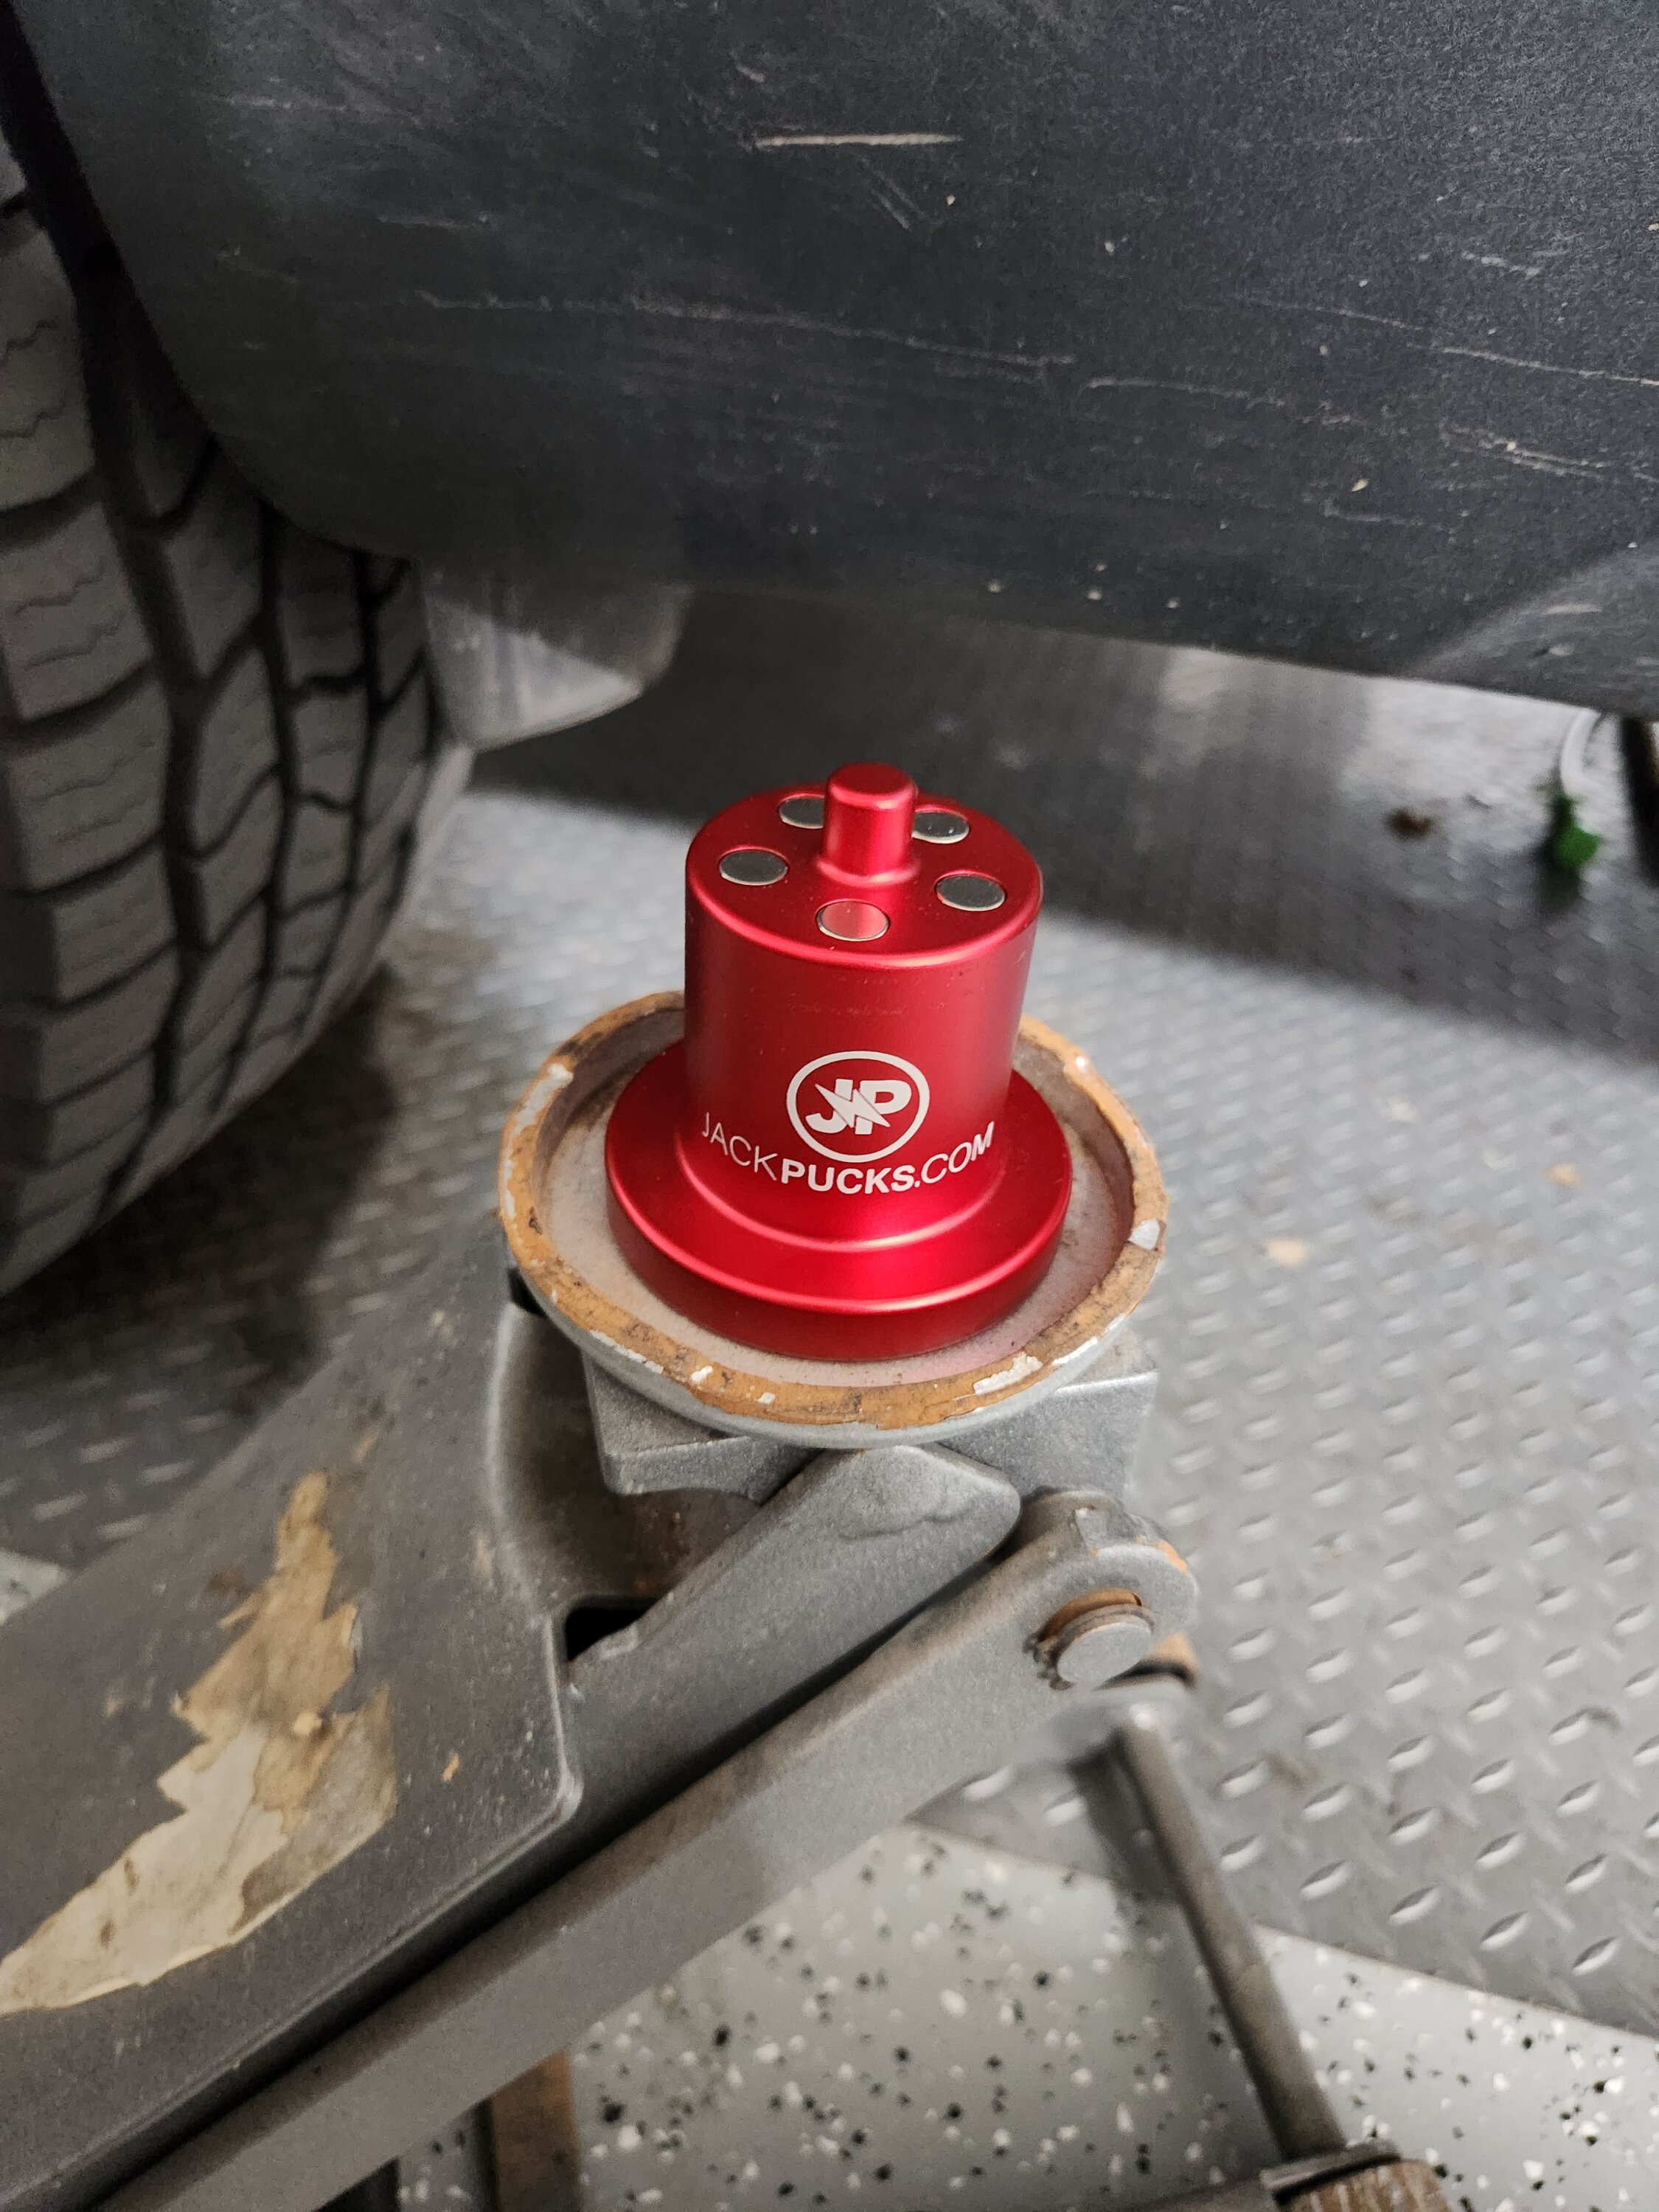 Rivian R1T R1S Innovative Invention: The History of Magnetic Jack Pucks for Rivian Vehicles 20230223_171053